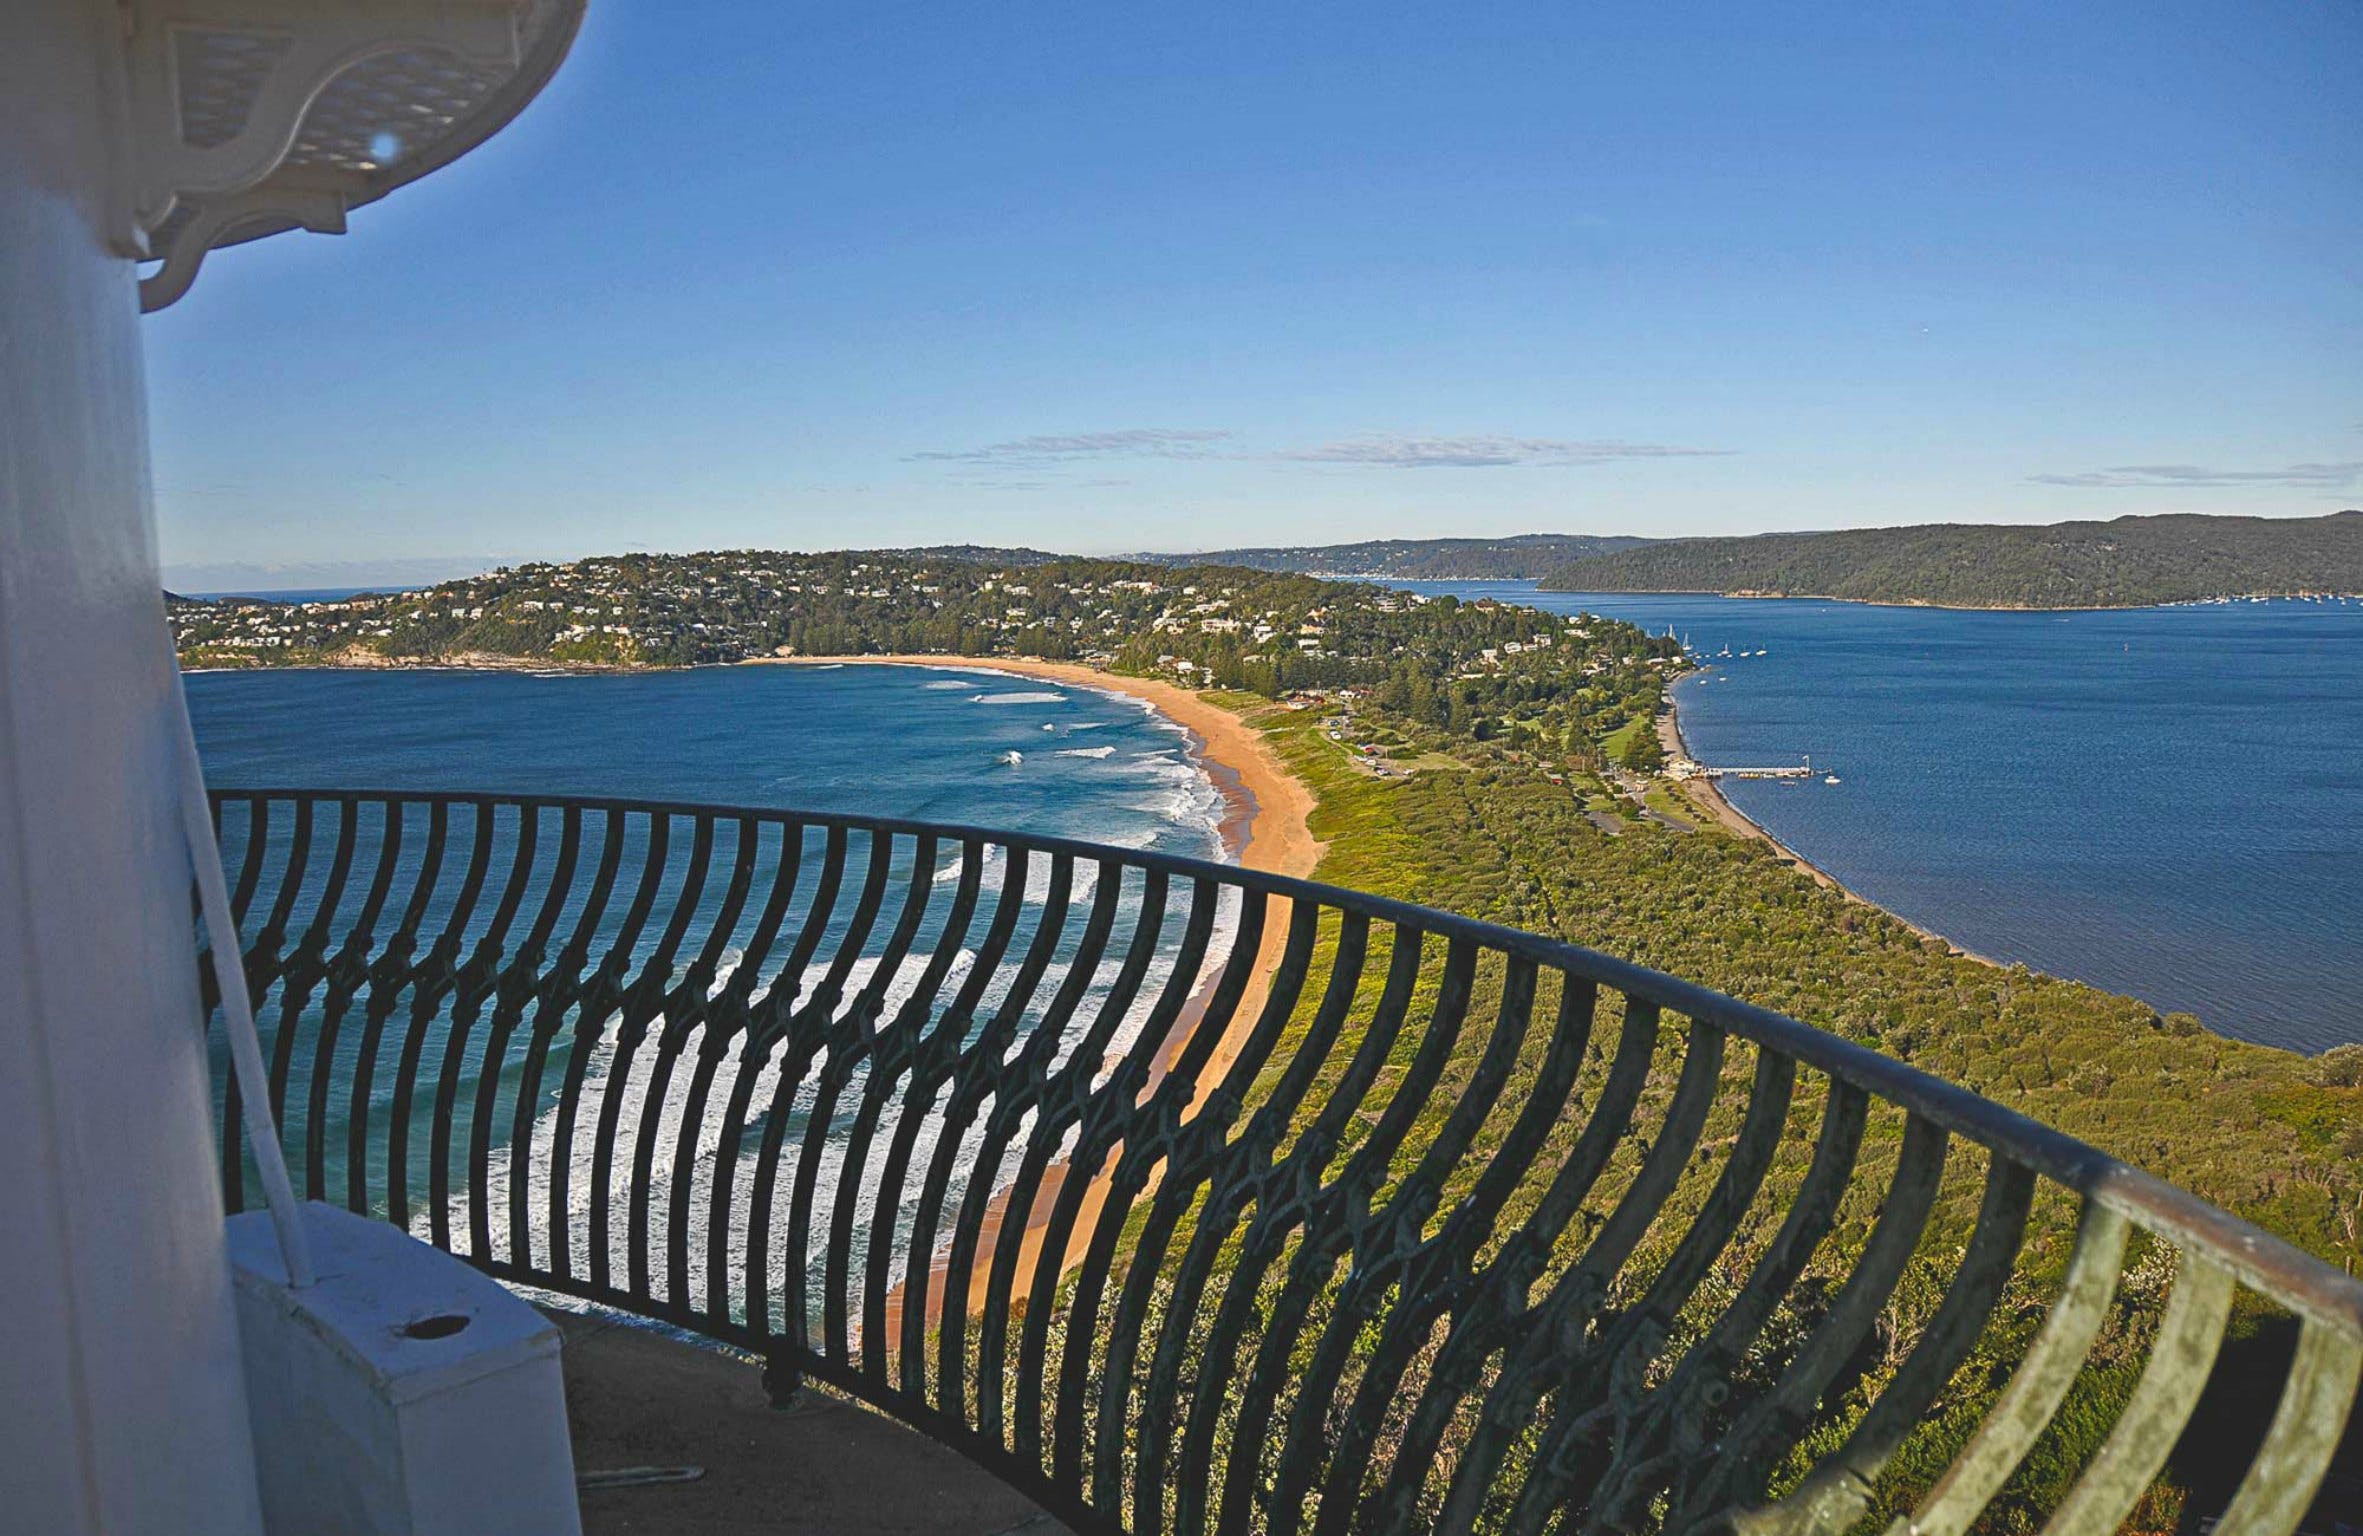 Barrenjoey Lighthouse - Find Attractions